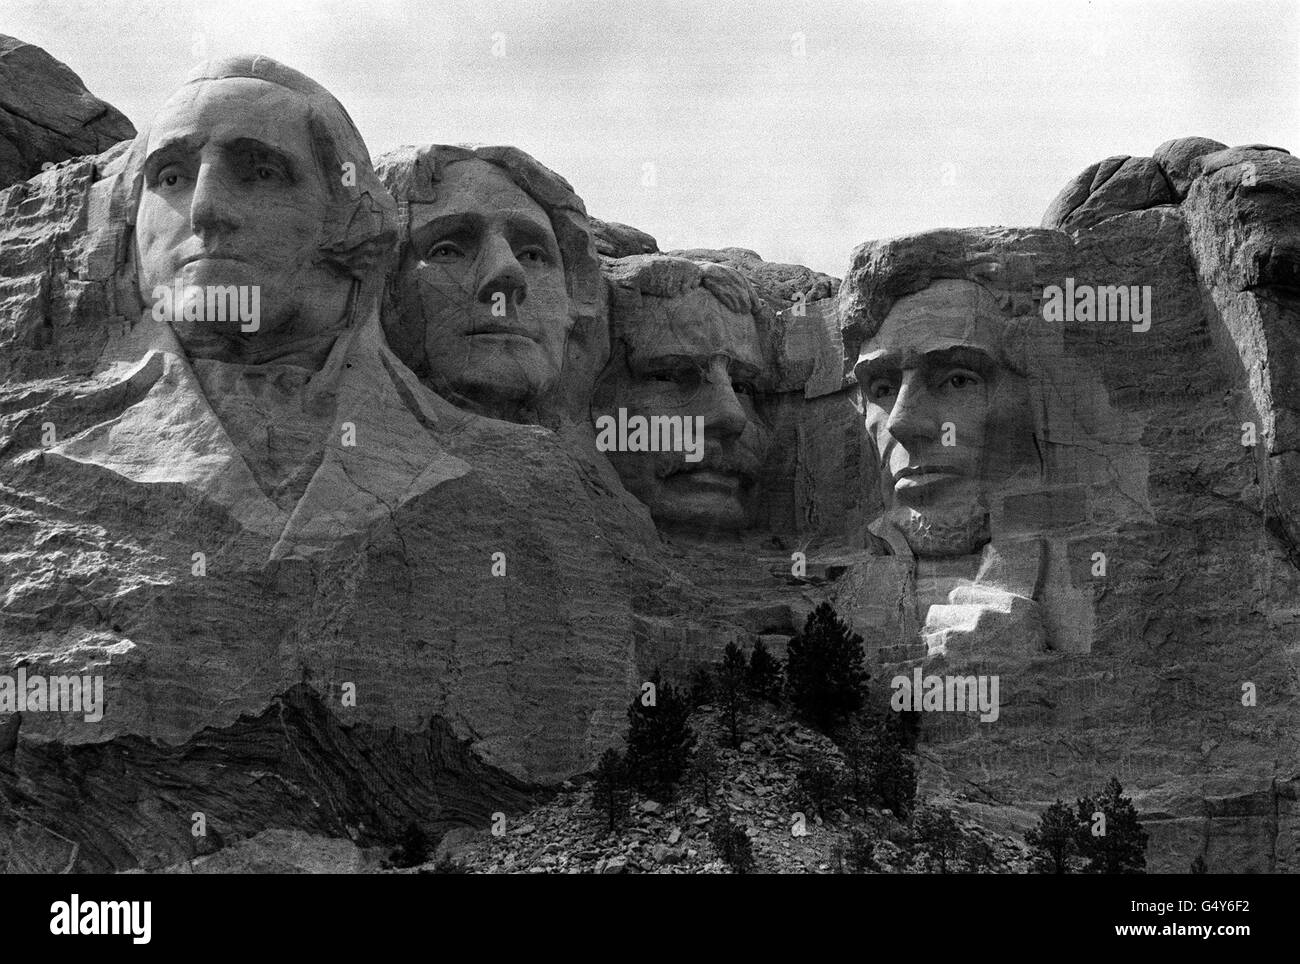 Mount Rushmore, America's Shrine of Democracy 'written' in mountain sculpture in the Black Hills of South Dakota. The rock heads of four former Presidents - Washington, Jefferson, Roosevelt, and Lincoln are a national monument of American history. * They are an outstanding testimony of the work of sculptor Gutzon Borglum who started the collosal project in 1927. Each head is 60ft high and scaled to men 465 ft tall if fully carved. Each nose is 20ft long, the eyes 11ft wide and Lincoln's mole is 15 inches across. Stock Photo